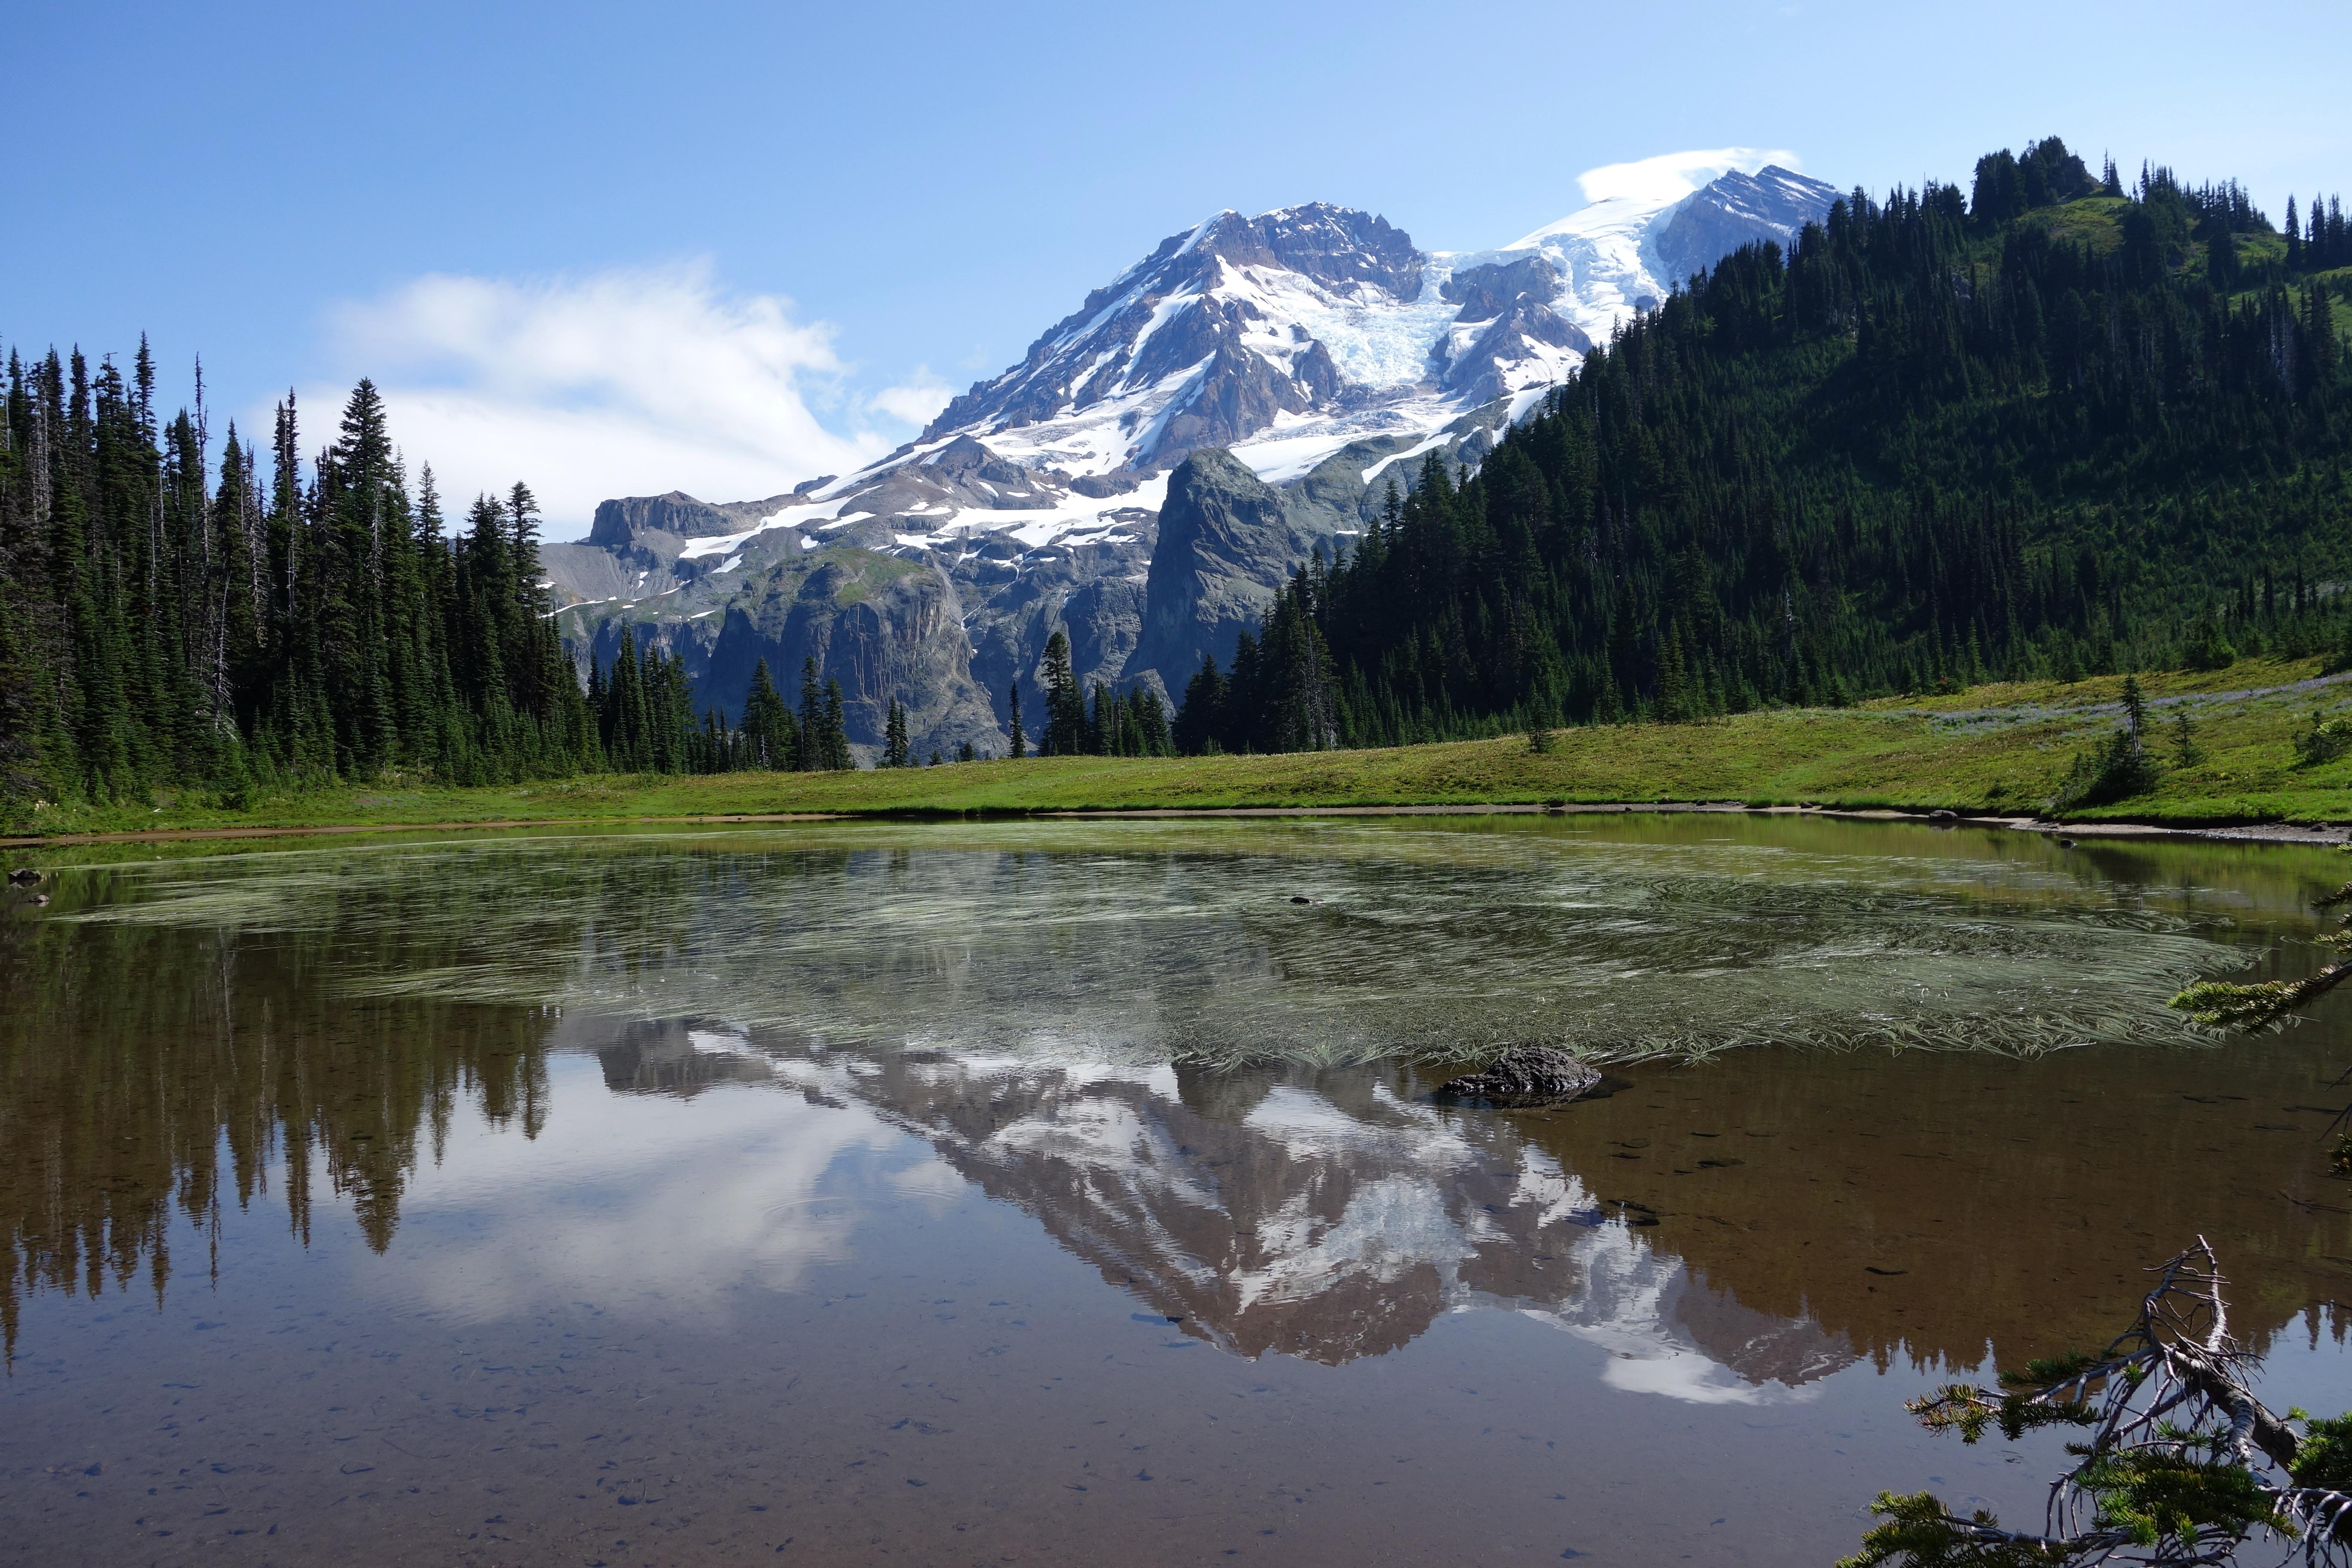 A glaciated mountain framed by forested hillsides reflects in a still mountain lake.